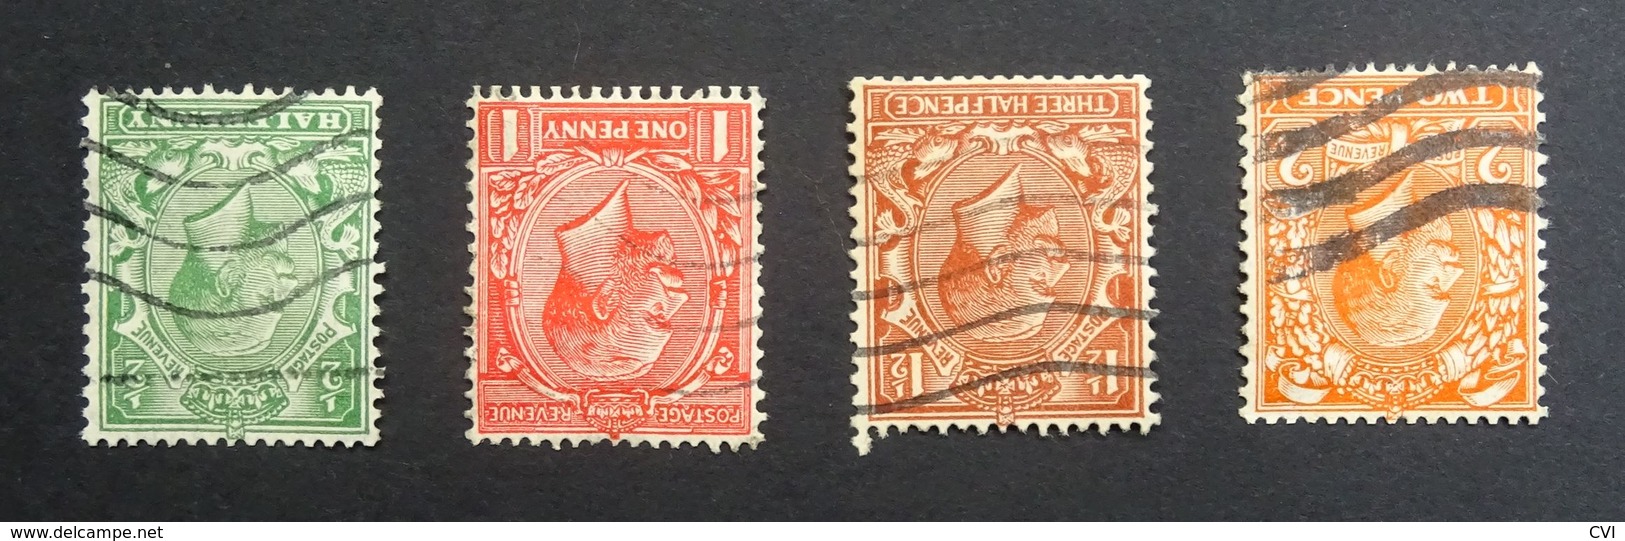 GB KGV 1912-24  SG351,360,362,368/Sc.#159,160,161,162  1/2d To 2d, Wmk 100 Royal Simple Cypher INVERTED, Used (4 Stamps) - Used Stamps